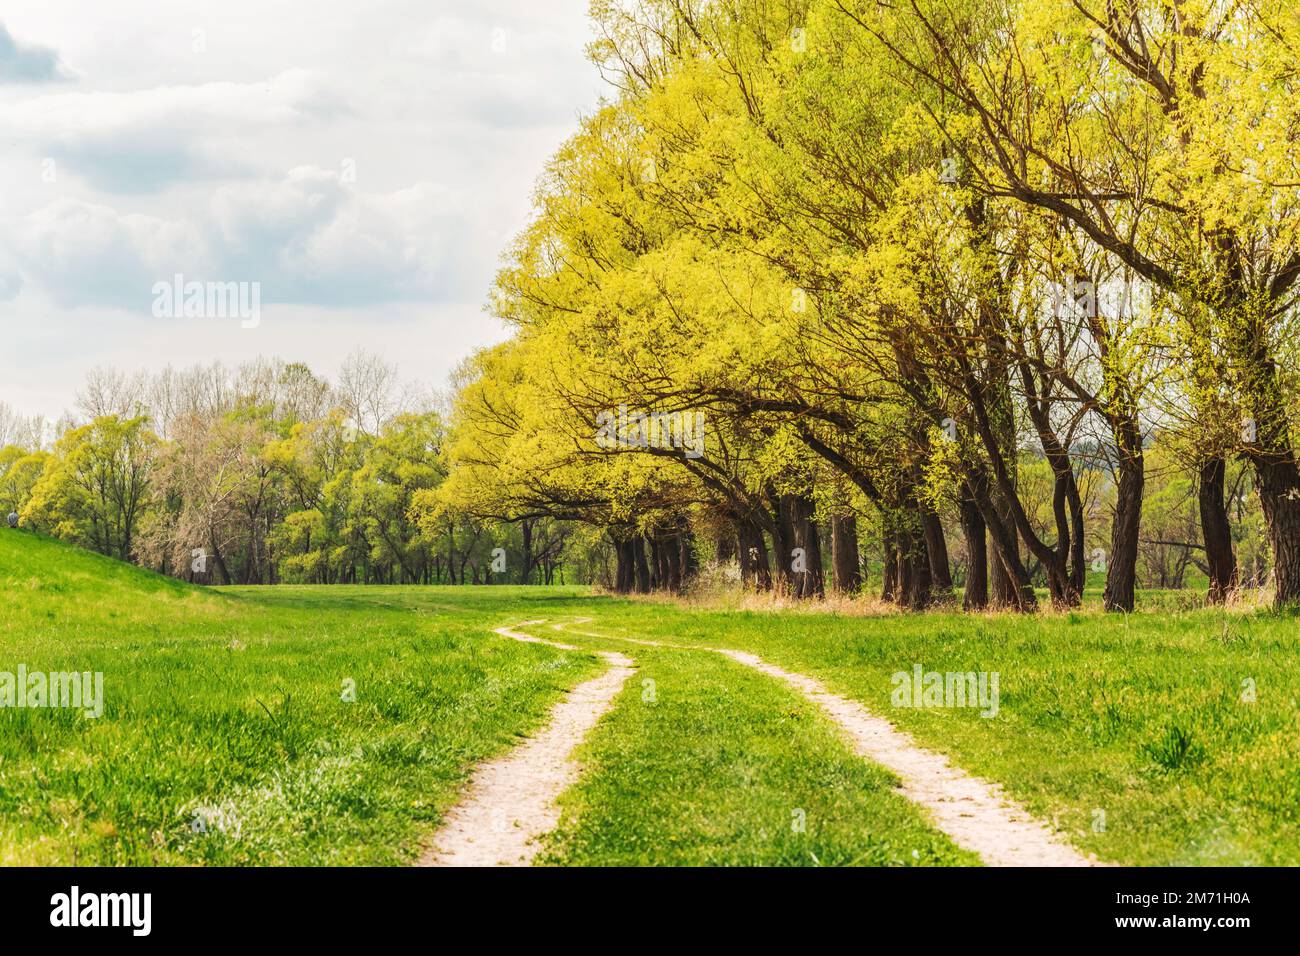 A row of trees resplendent in spring colors on the banks of the Ipoly river, Balassagyarmat, Hungary Stock Photo